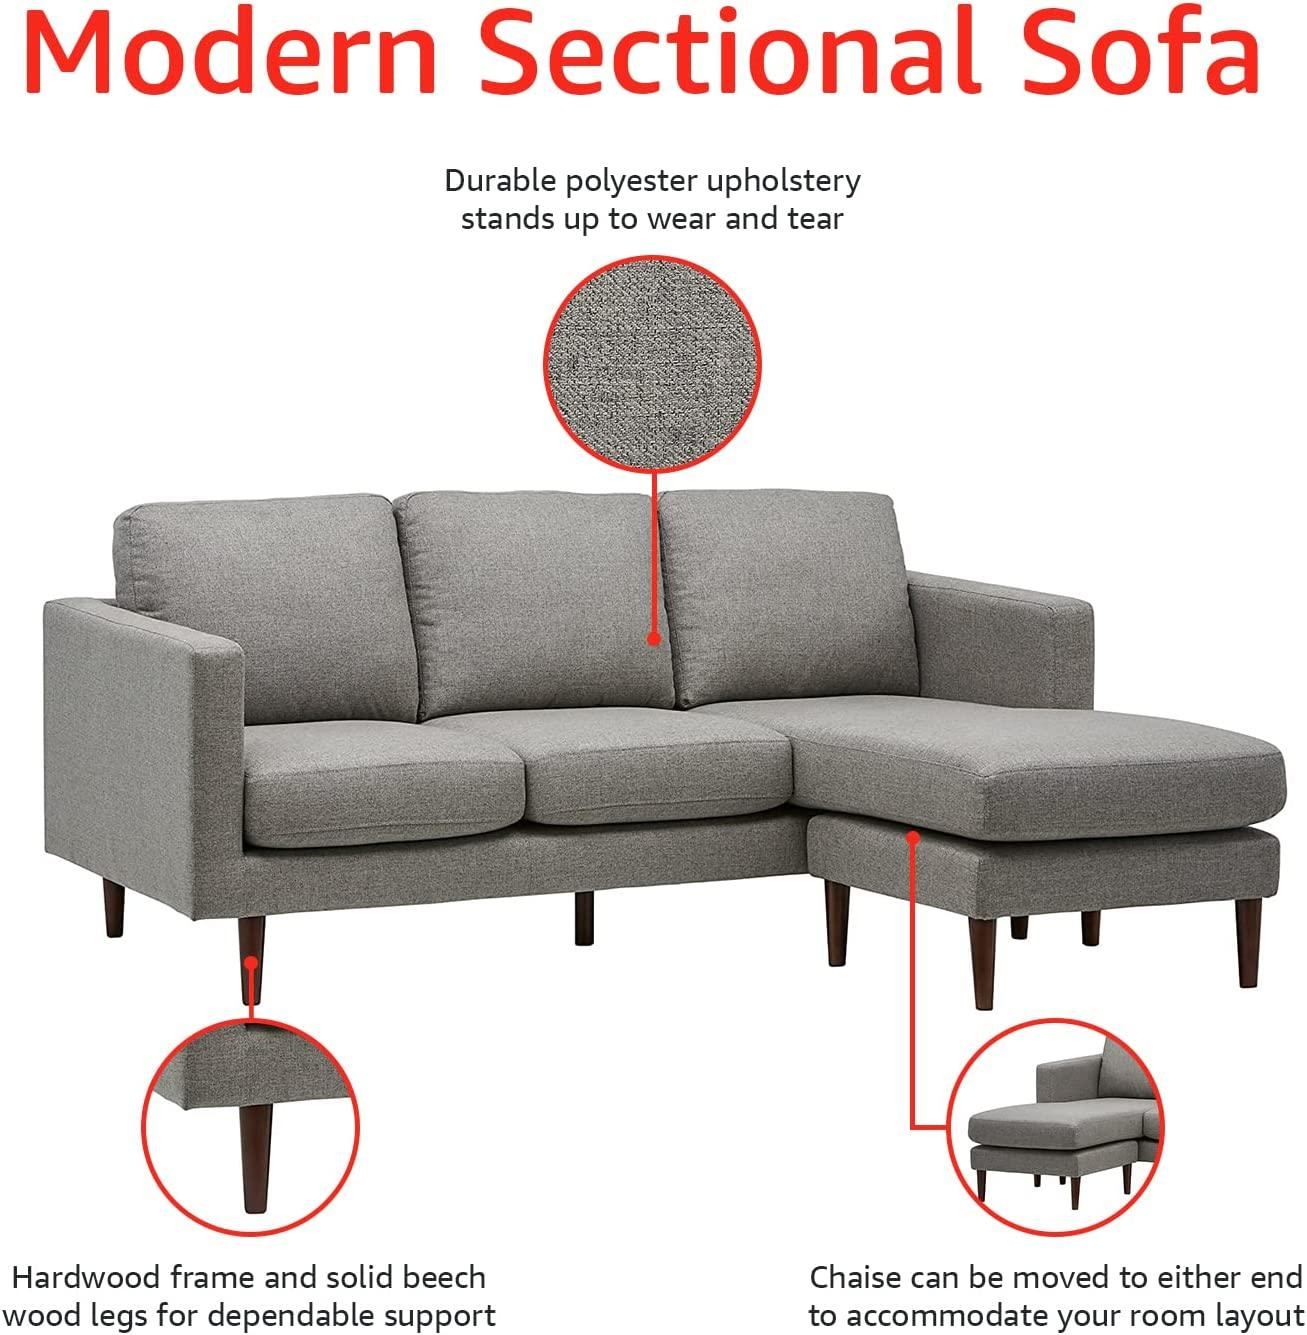 Amazon Brand – Rivet Revolve Modern Upholstered Sofa with Reversible Sectional Chaise, 80"W, Grey Weave - Airbnb Ambassador